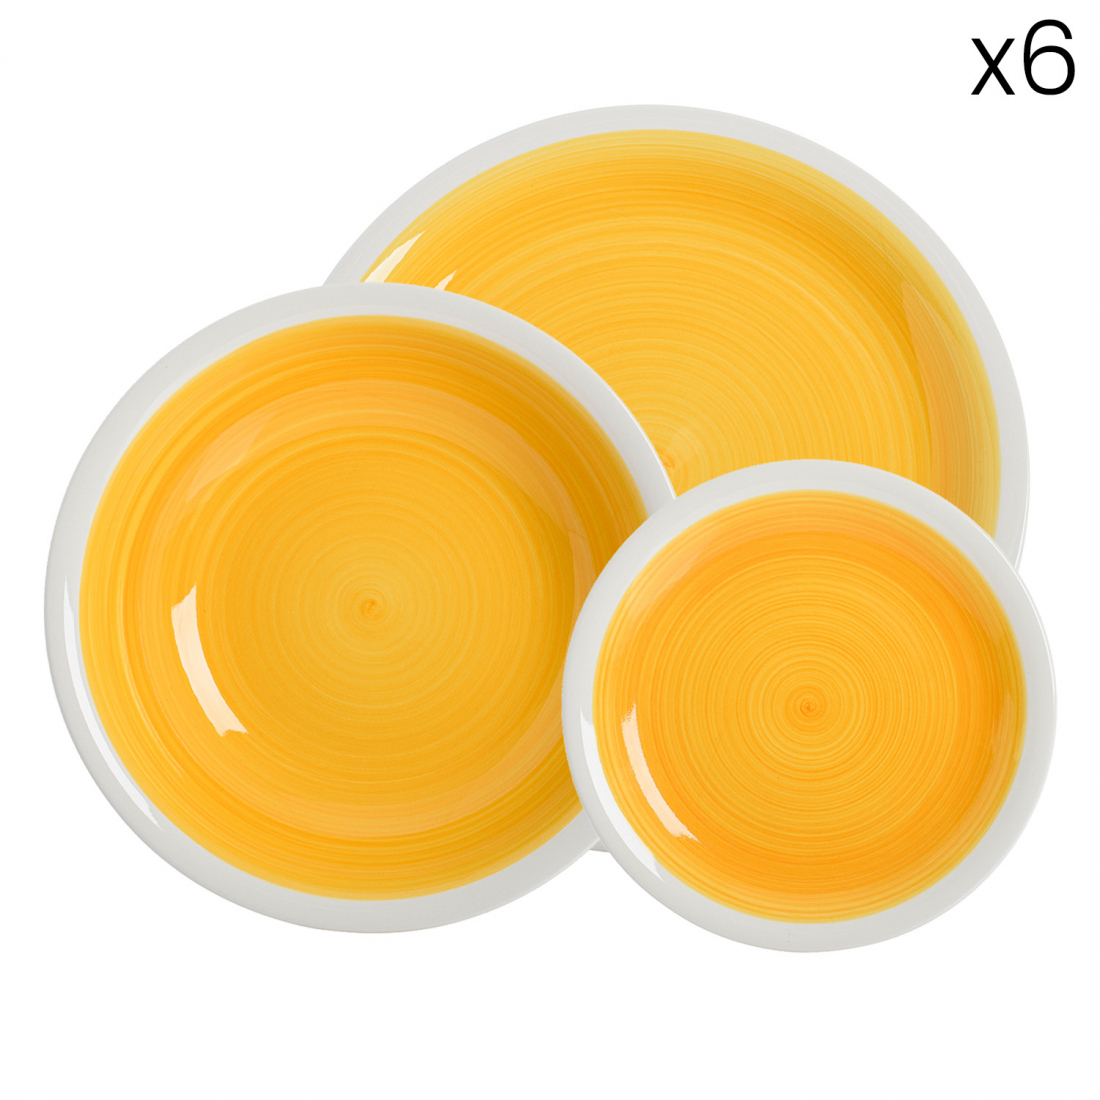 Jaipur Plate 18 Pieces Yellow